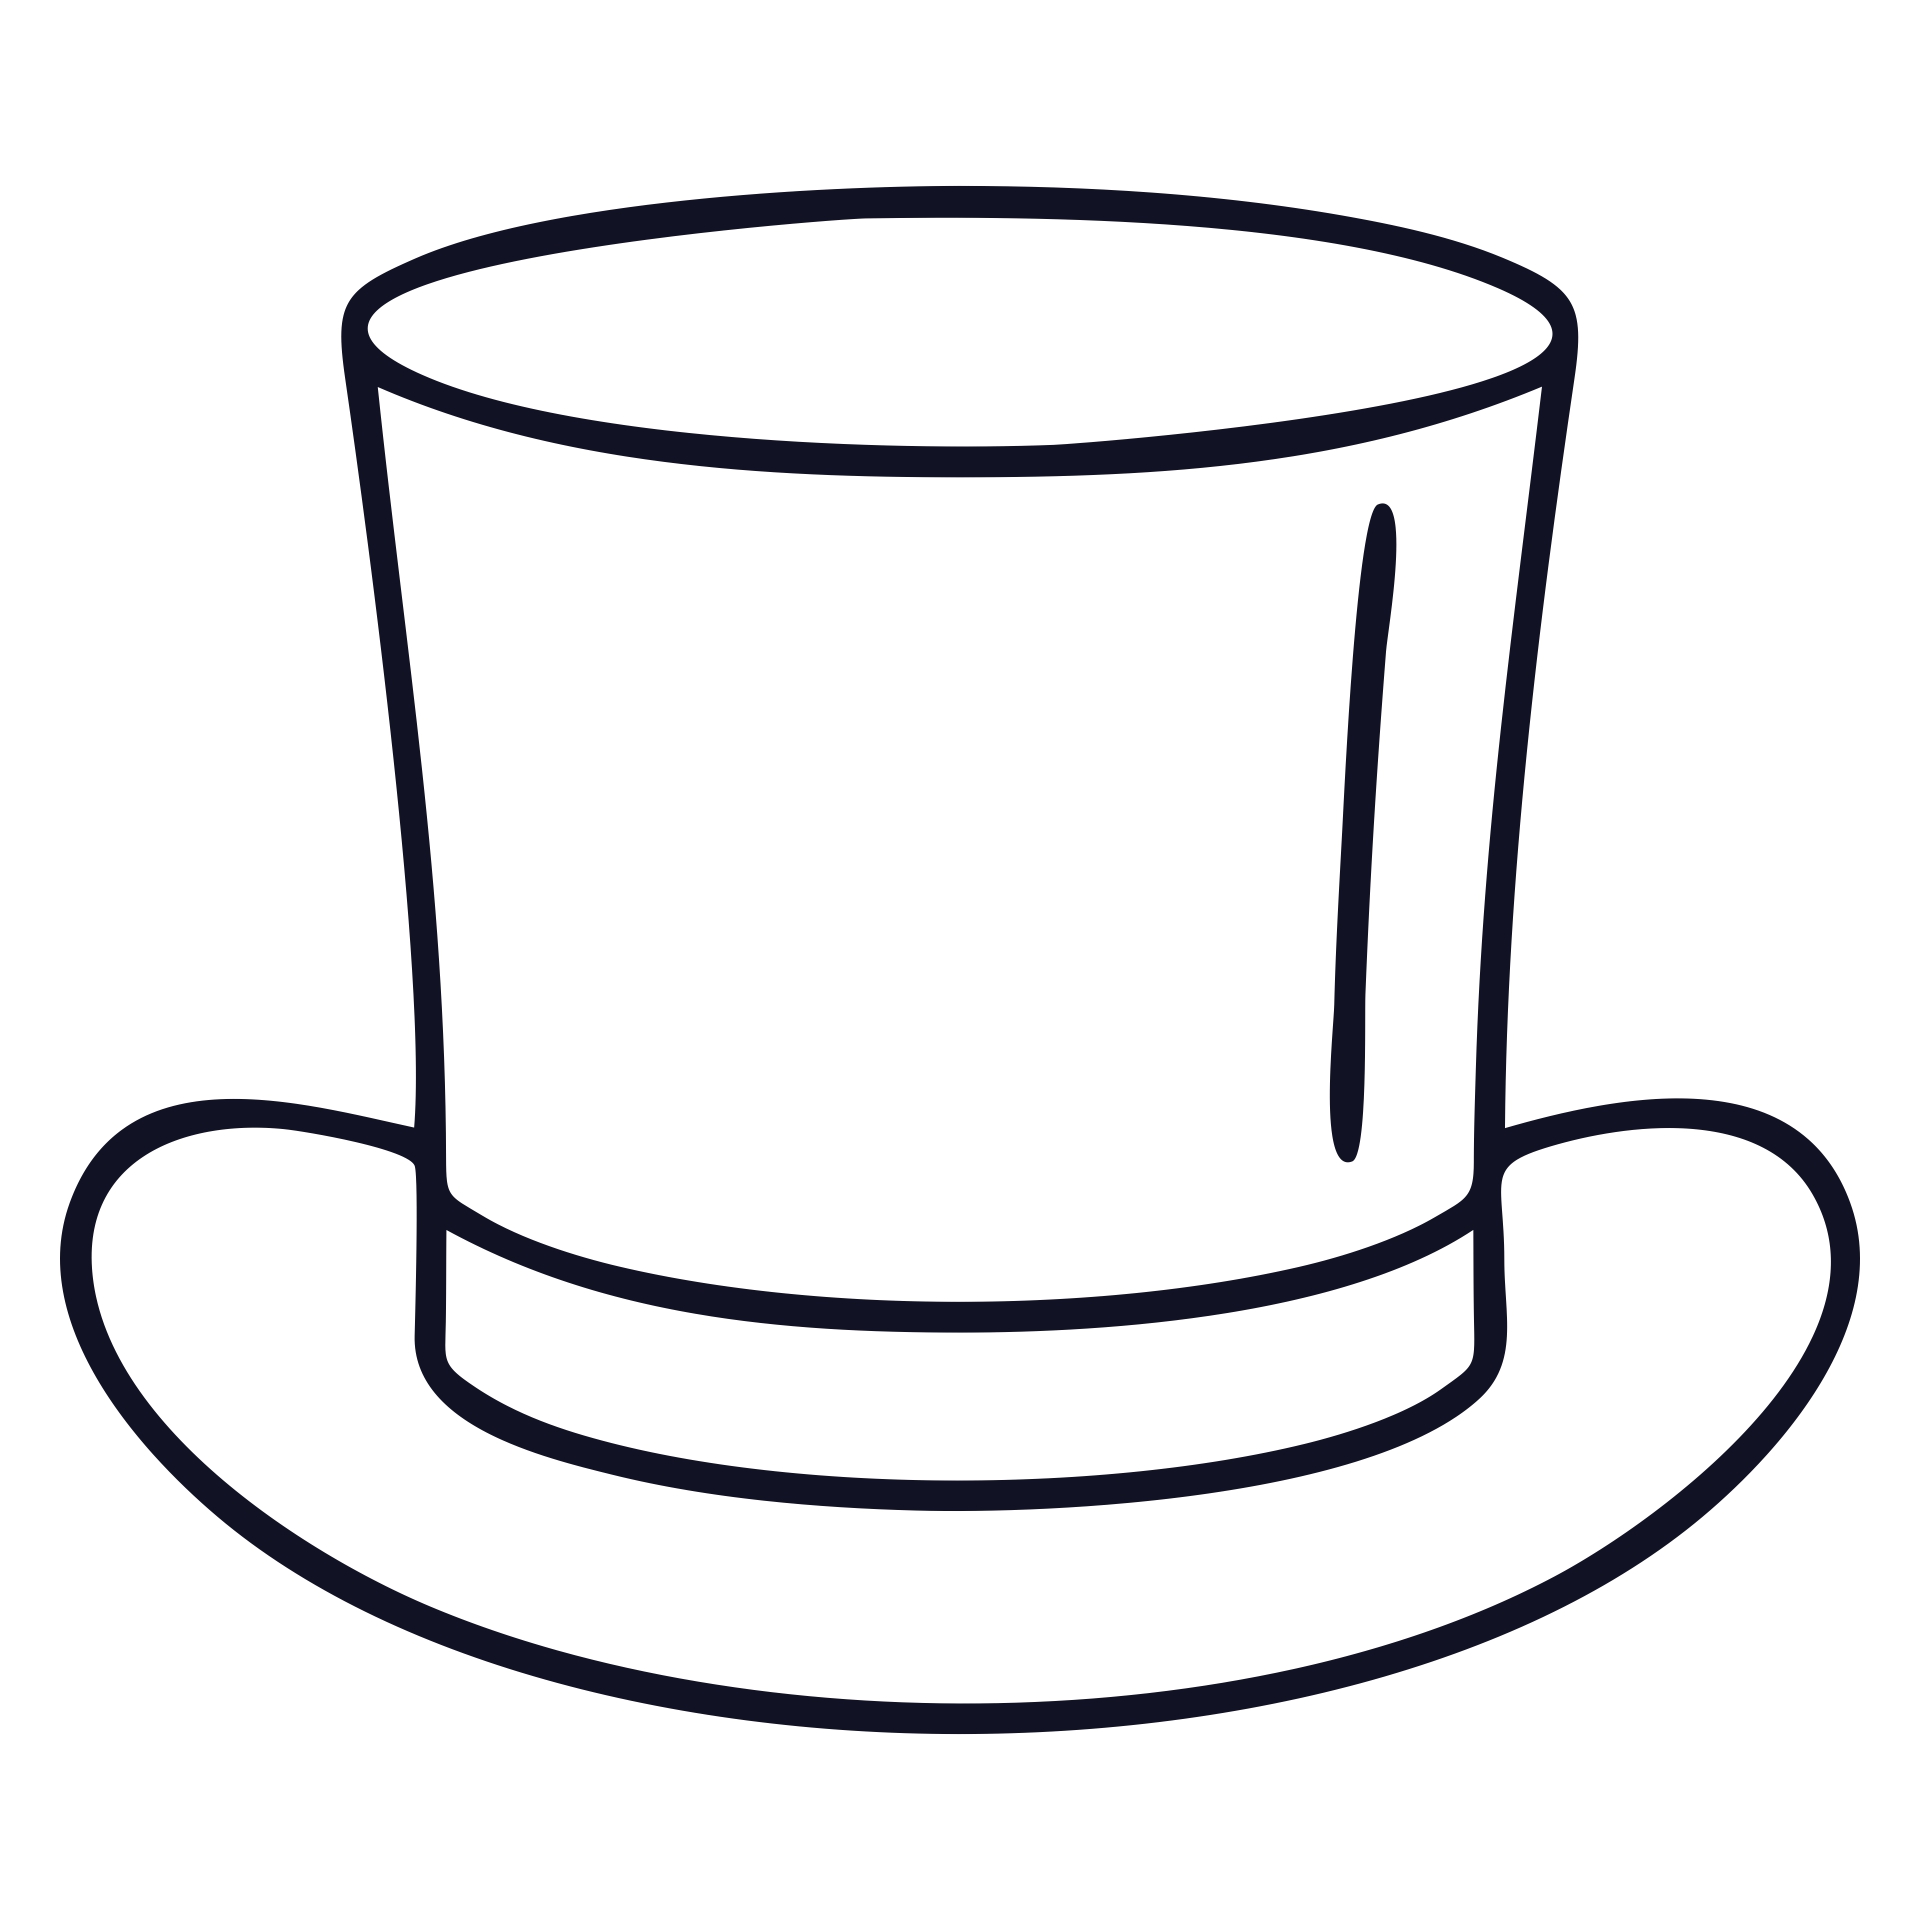 4 Best Images of Printable Top Hat Pattern Mad Hatter Top Hat Pattern